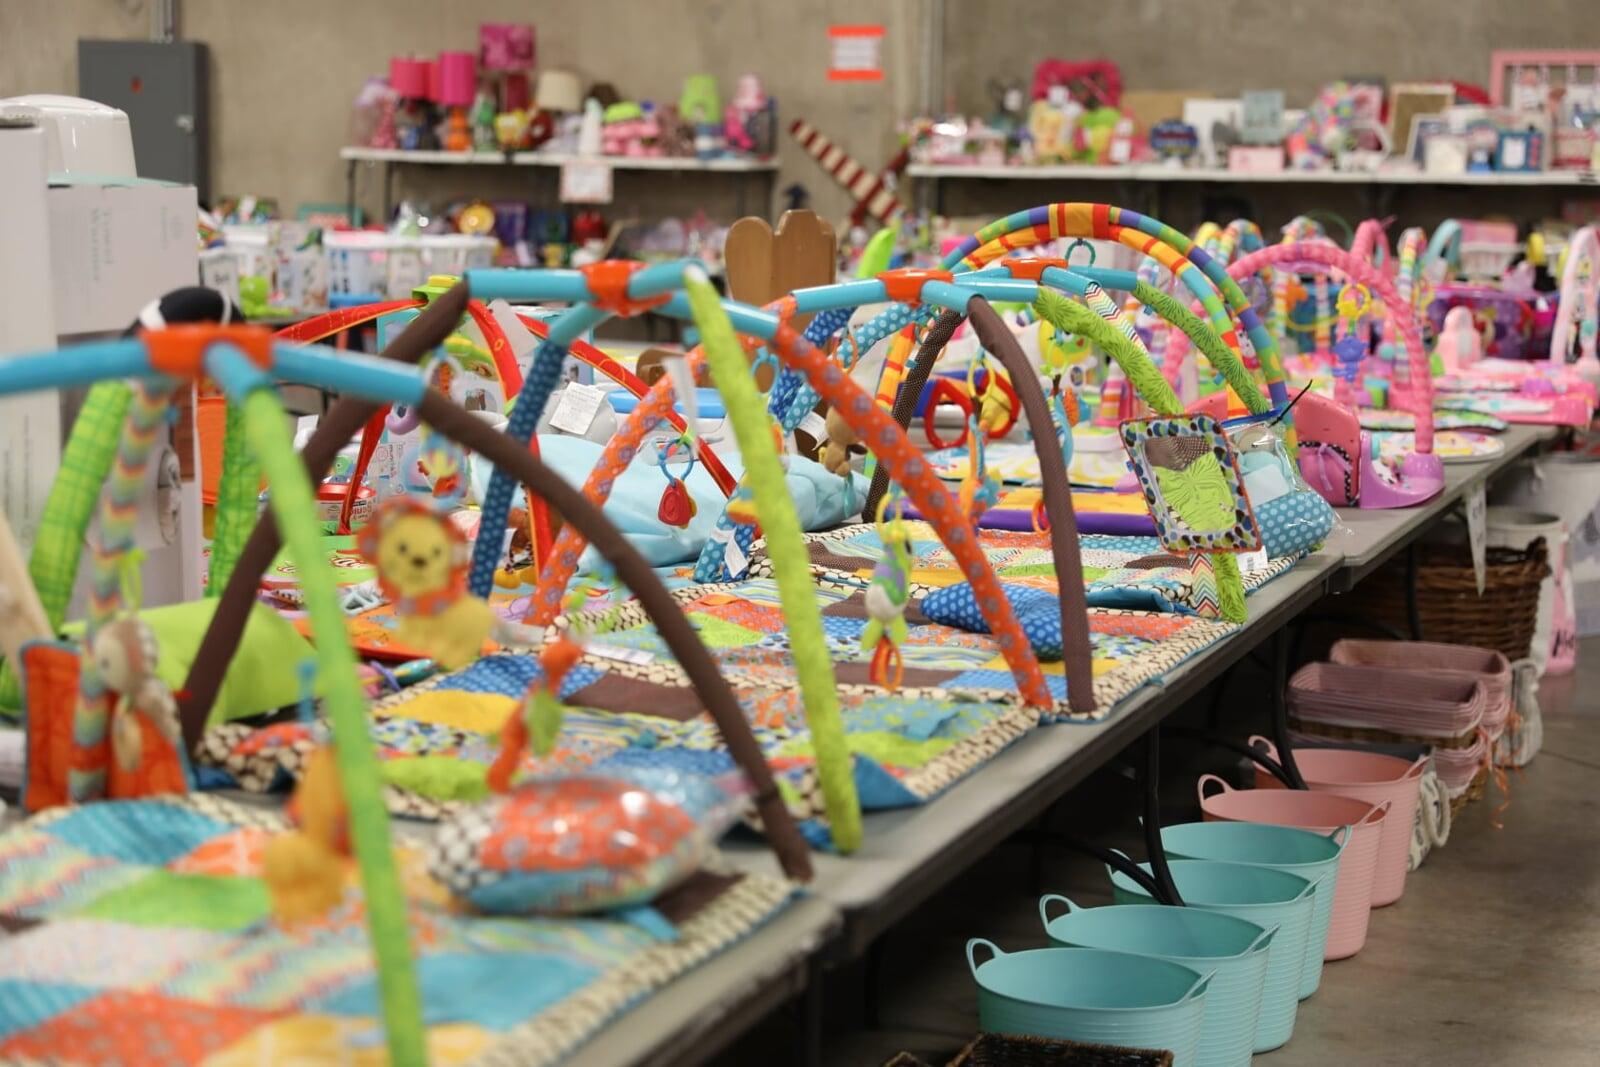 Tricycles, scooters and toys lined up on a table waiting for shoppers to attend the sale.